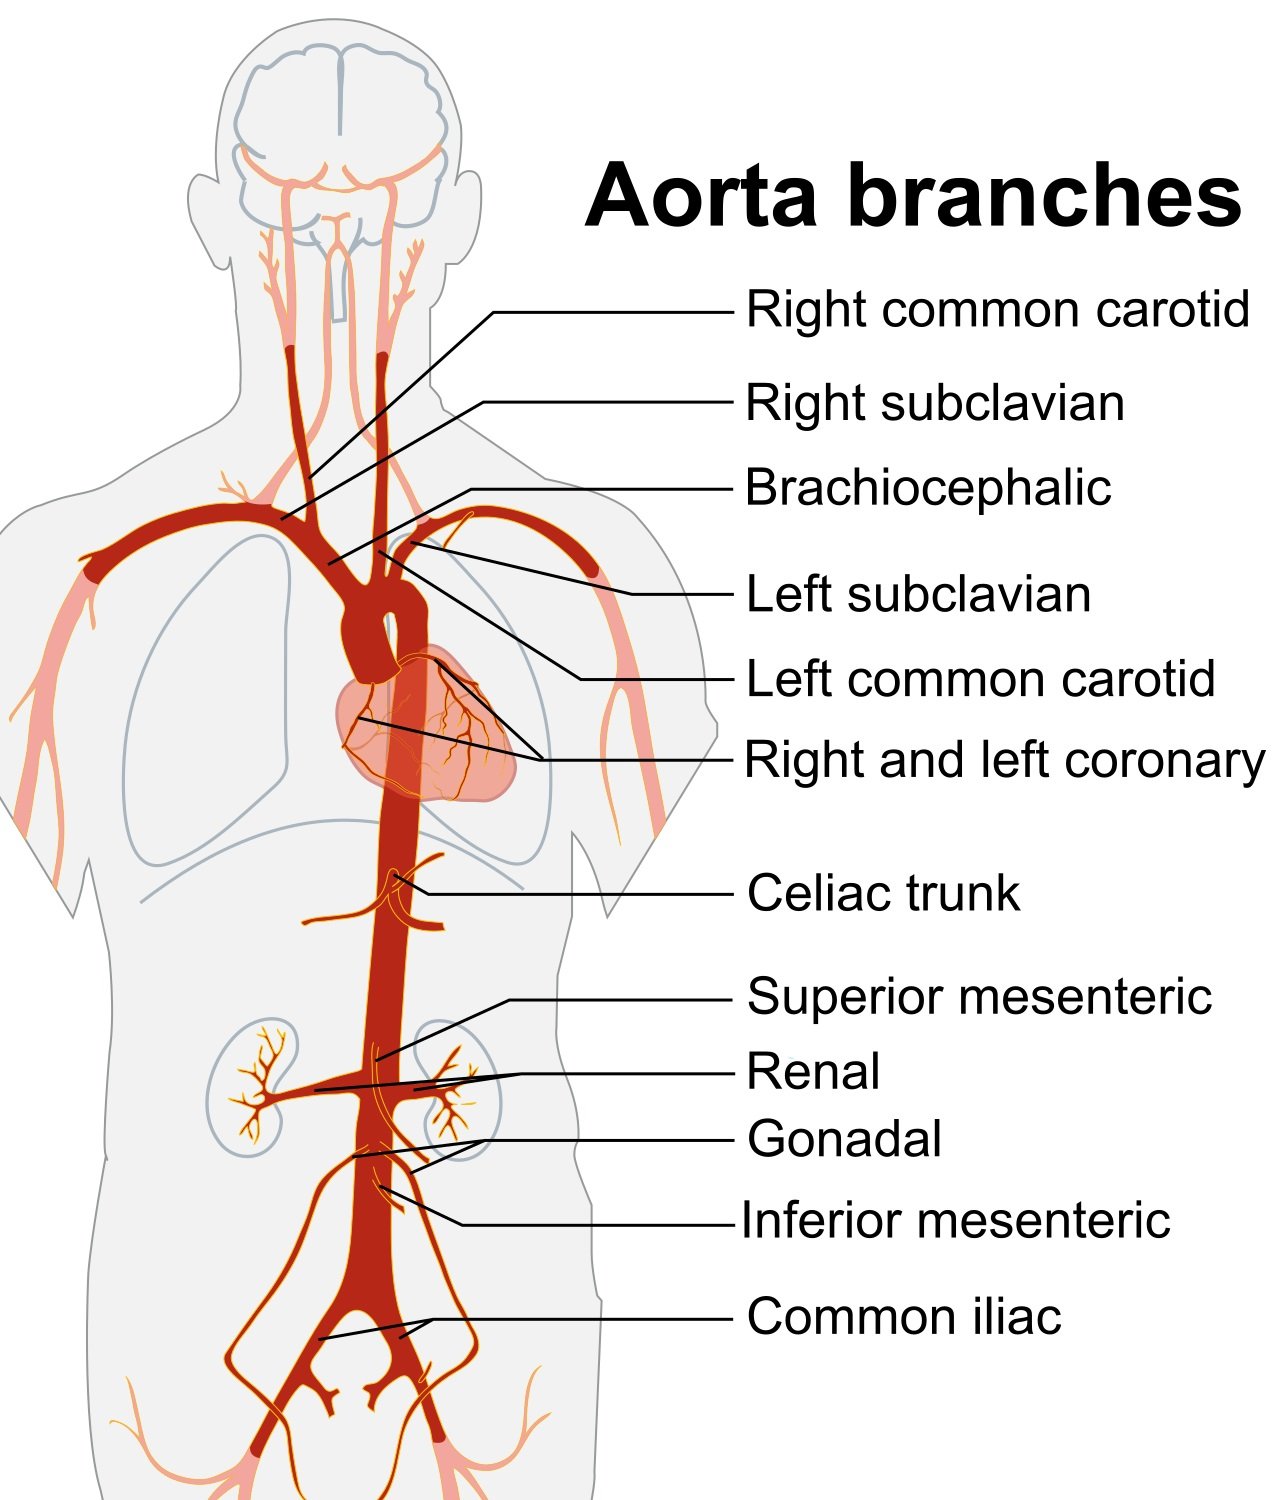 Illustration 1- Overview of the abdominal aorta with major branches (https---commons.wikimedia.org-wiki-File-Aorta_branches.jpg).jpg